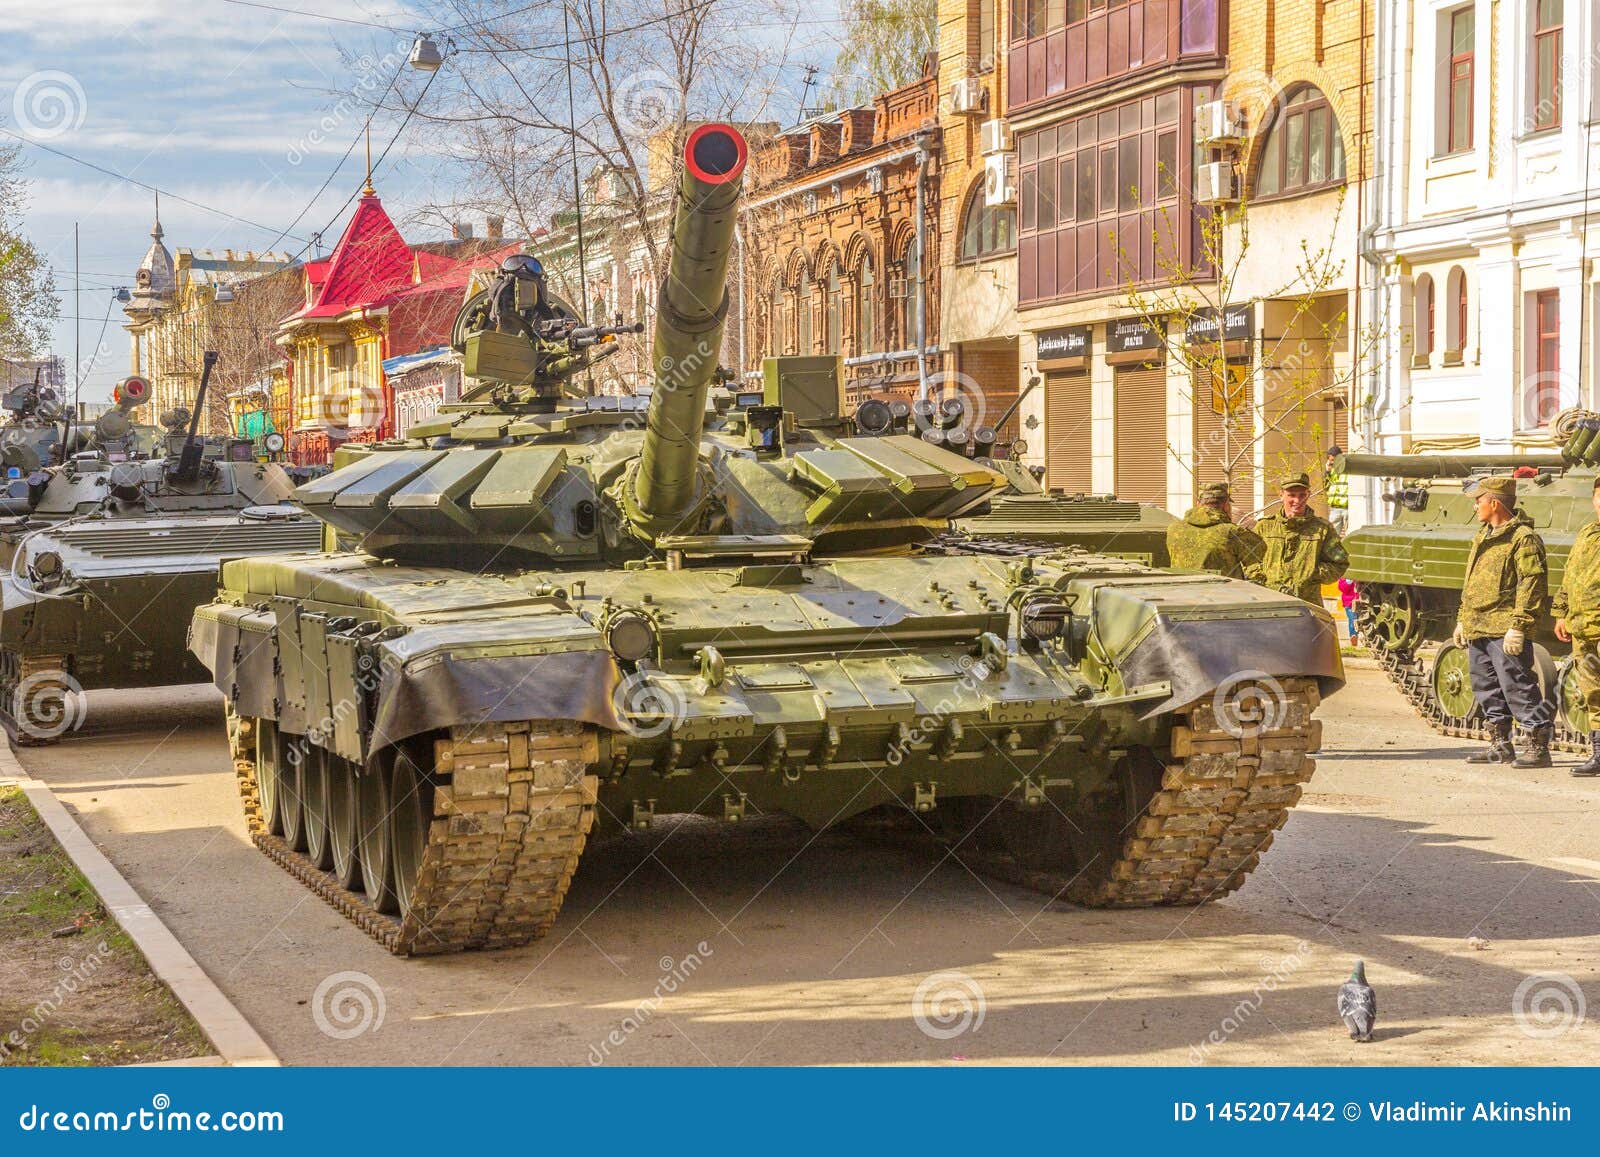 New Military Modified Russian Army Main Battle Tank T 72b3m In Green Camouflage At The City Street Editorial Photography Image Of Editorial Polygon